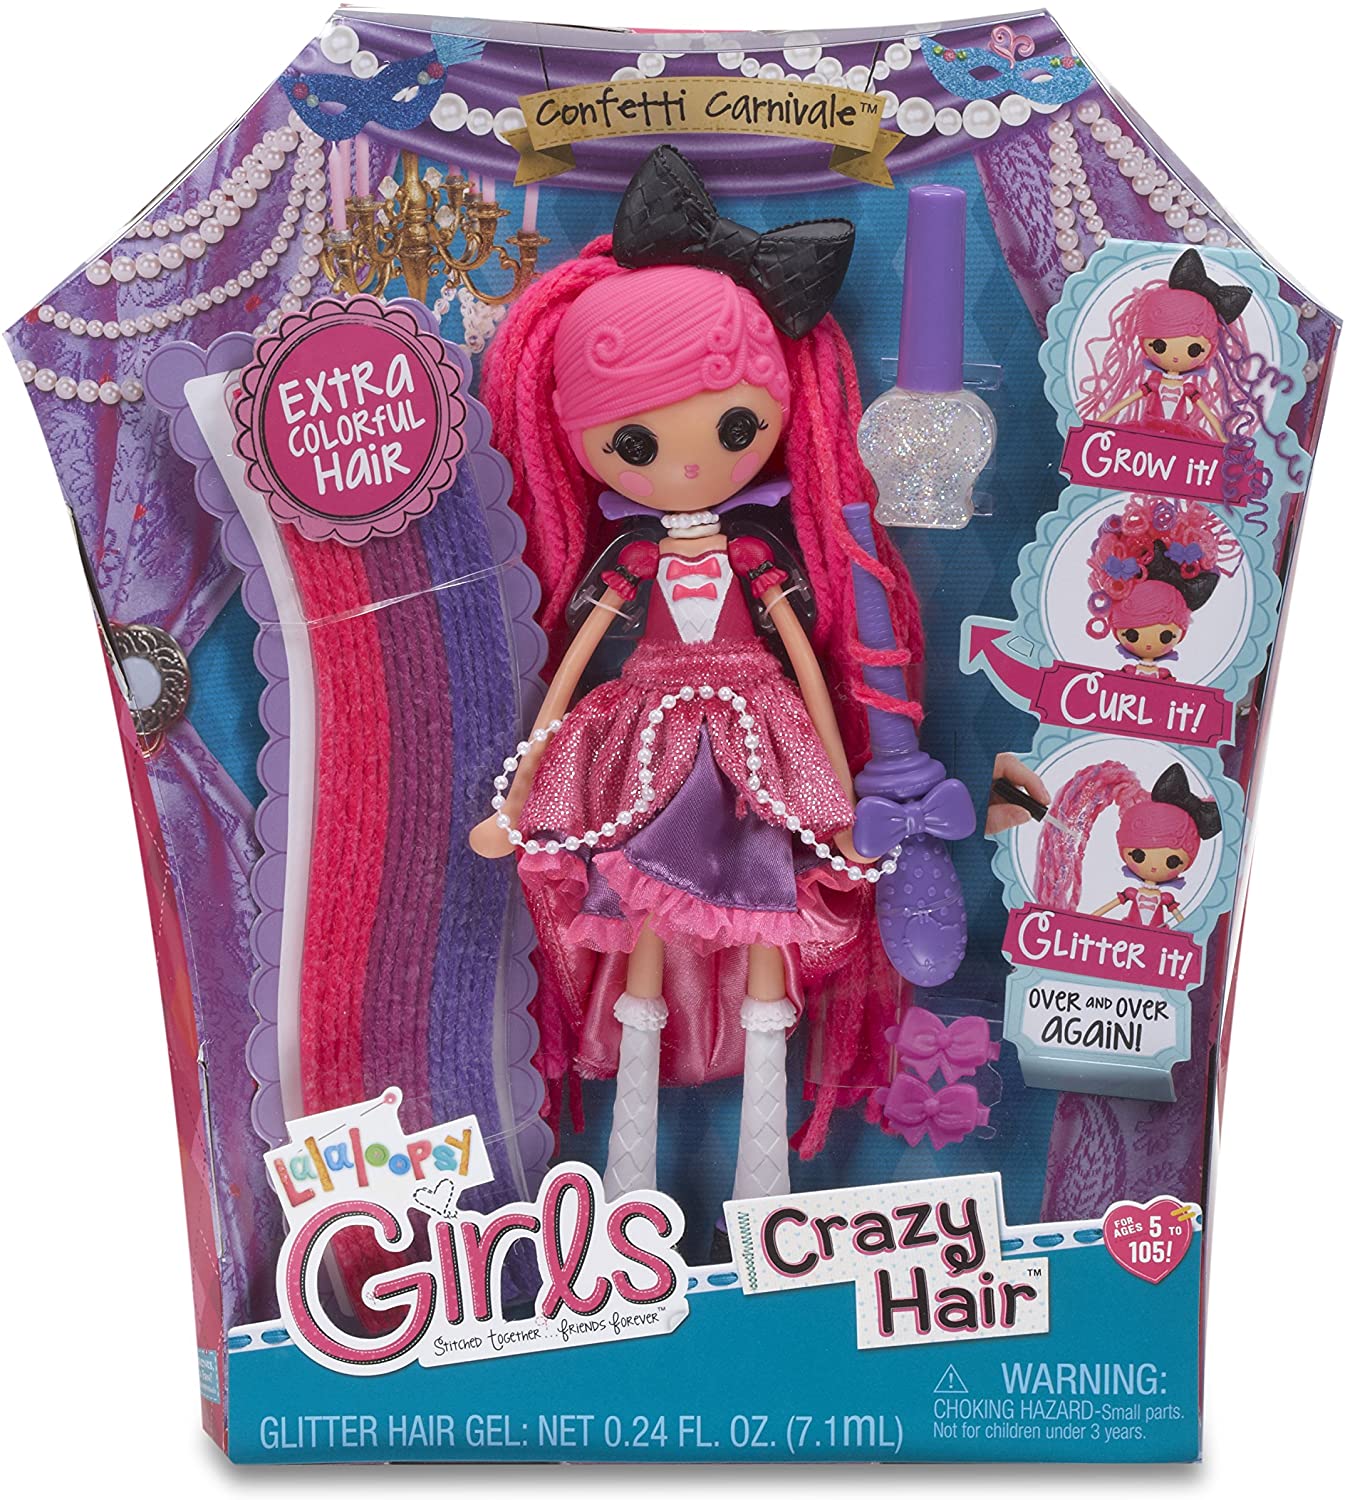 Confetti Carnivale Lalaloopsy Girls Crazy Hair - MGA 2015 - Poupée - Vêtement - Chaussures - Accessoire